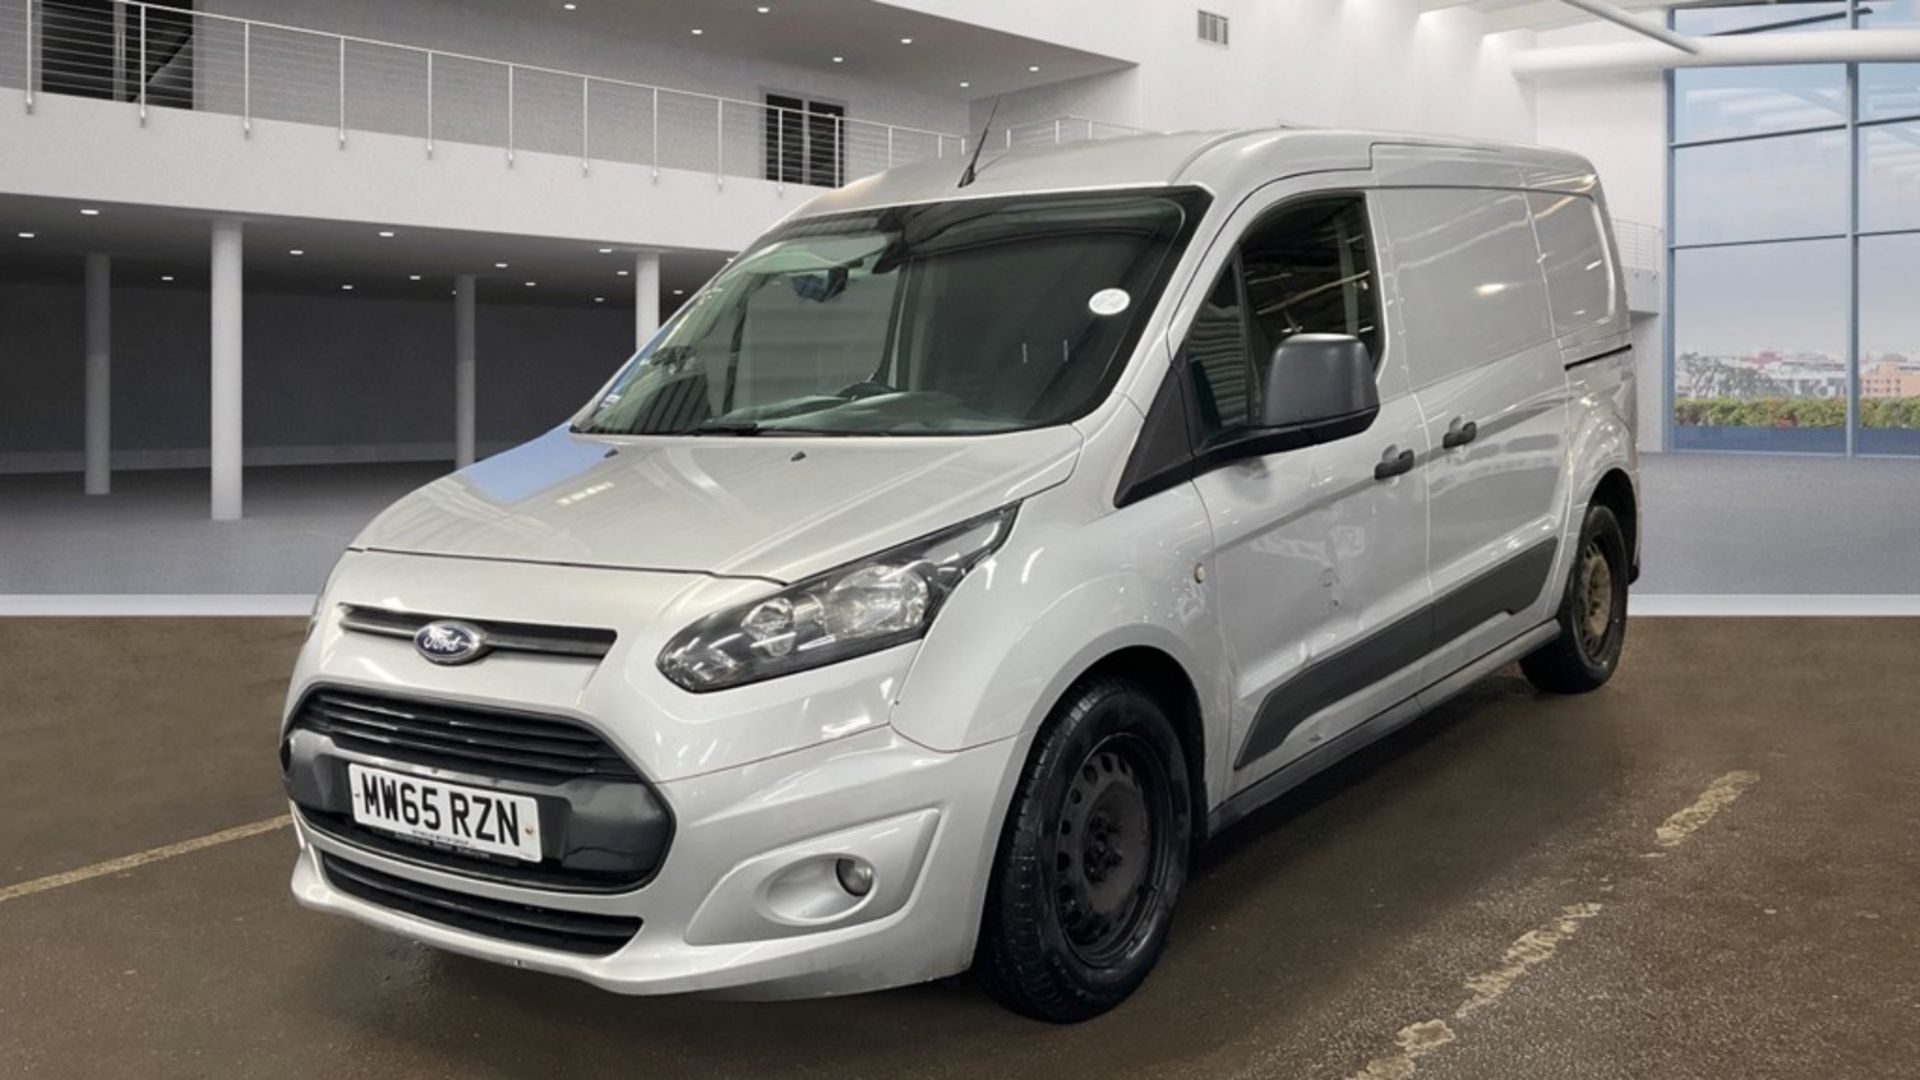 **ON SALE ** Ford Transit Connect 1.6 TDCI 95 240 L2H1 2015 -65 Reg' -Bluetooth Handsfree -Tow Bar - Image 2 of 9